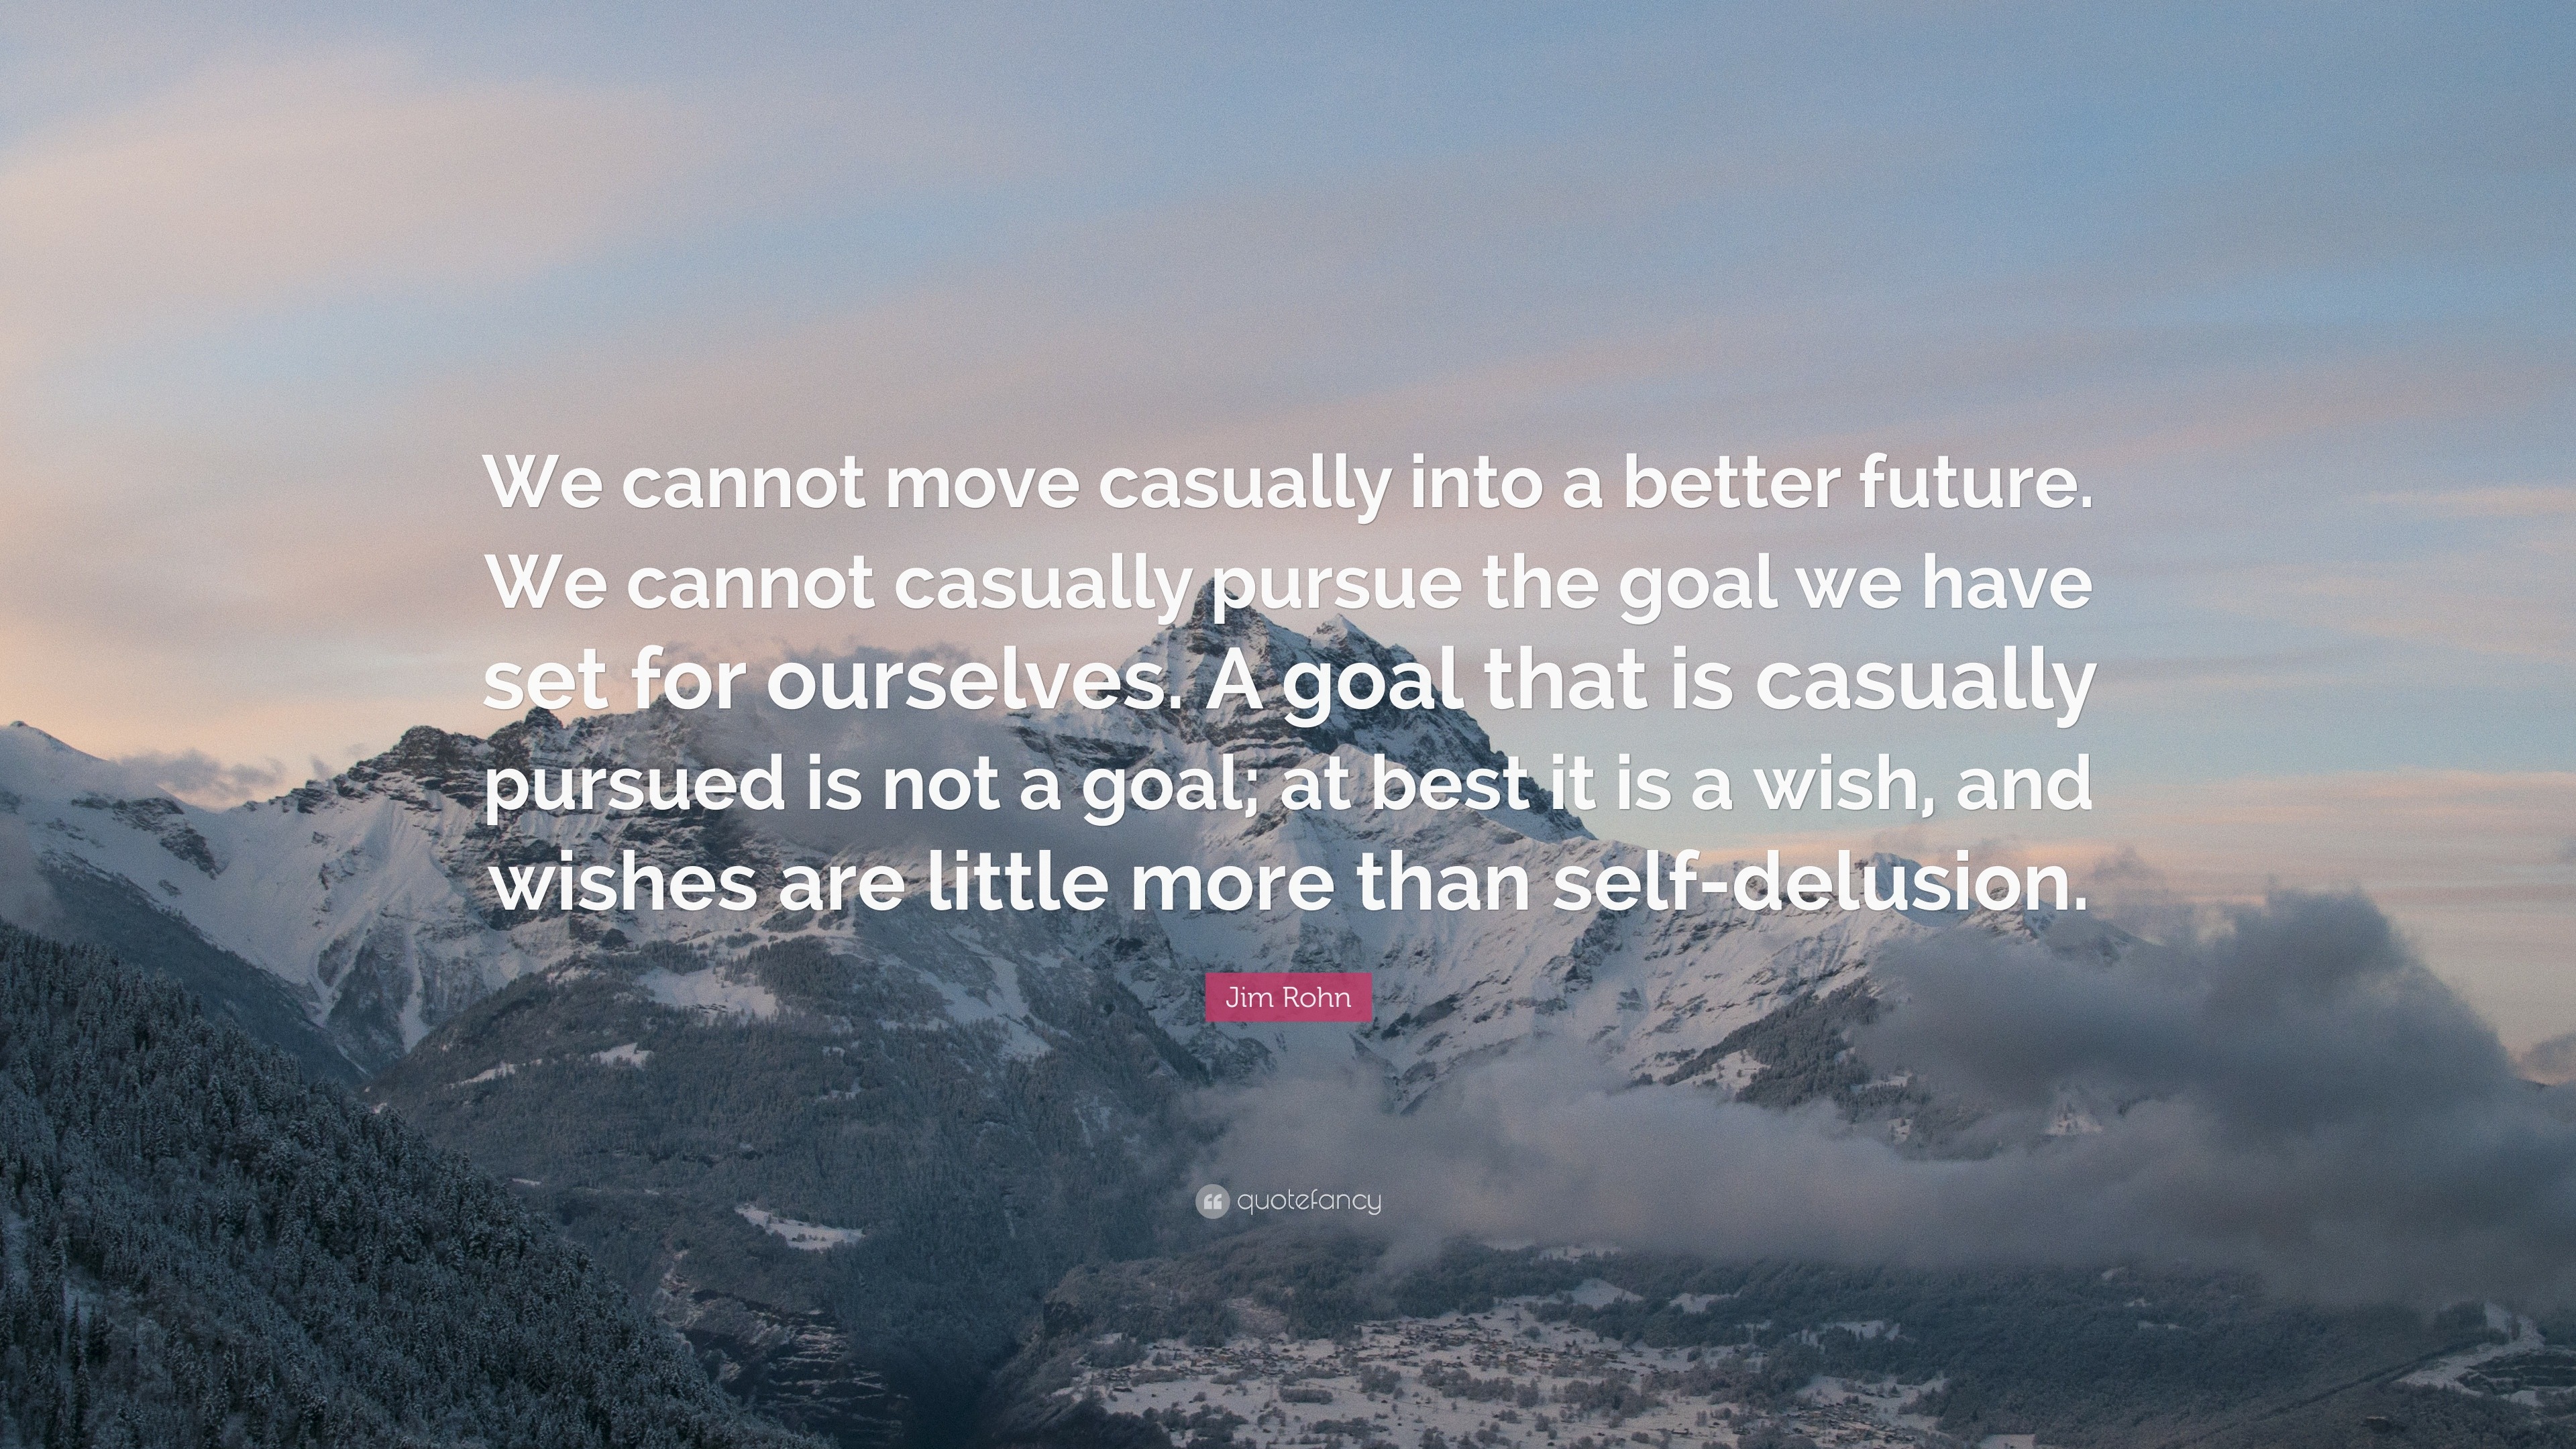 Jim Rohn Quote: “We cannot move casually into a better future. We ...